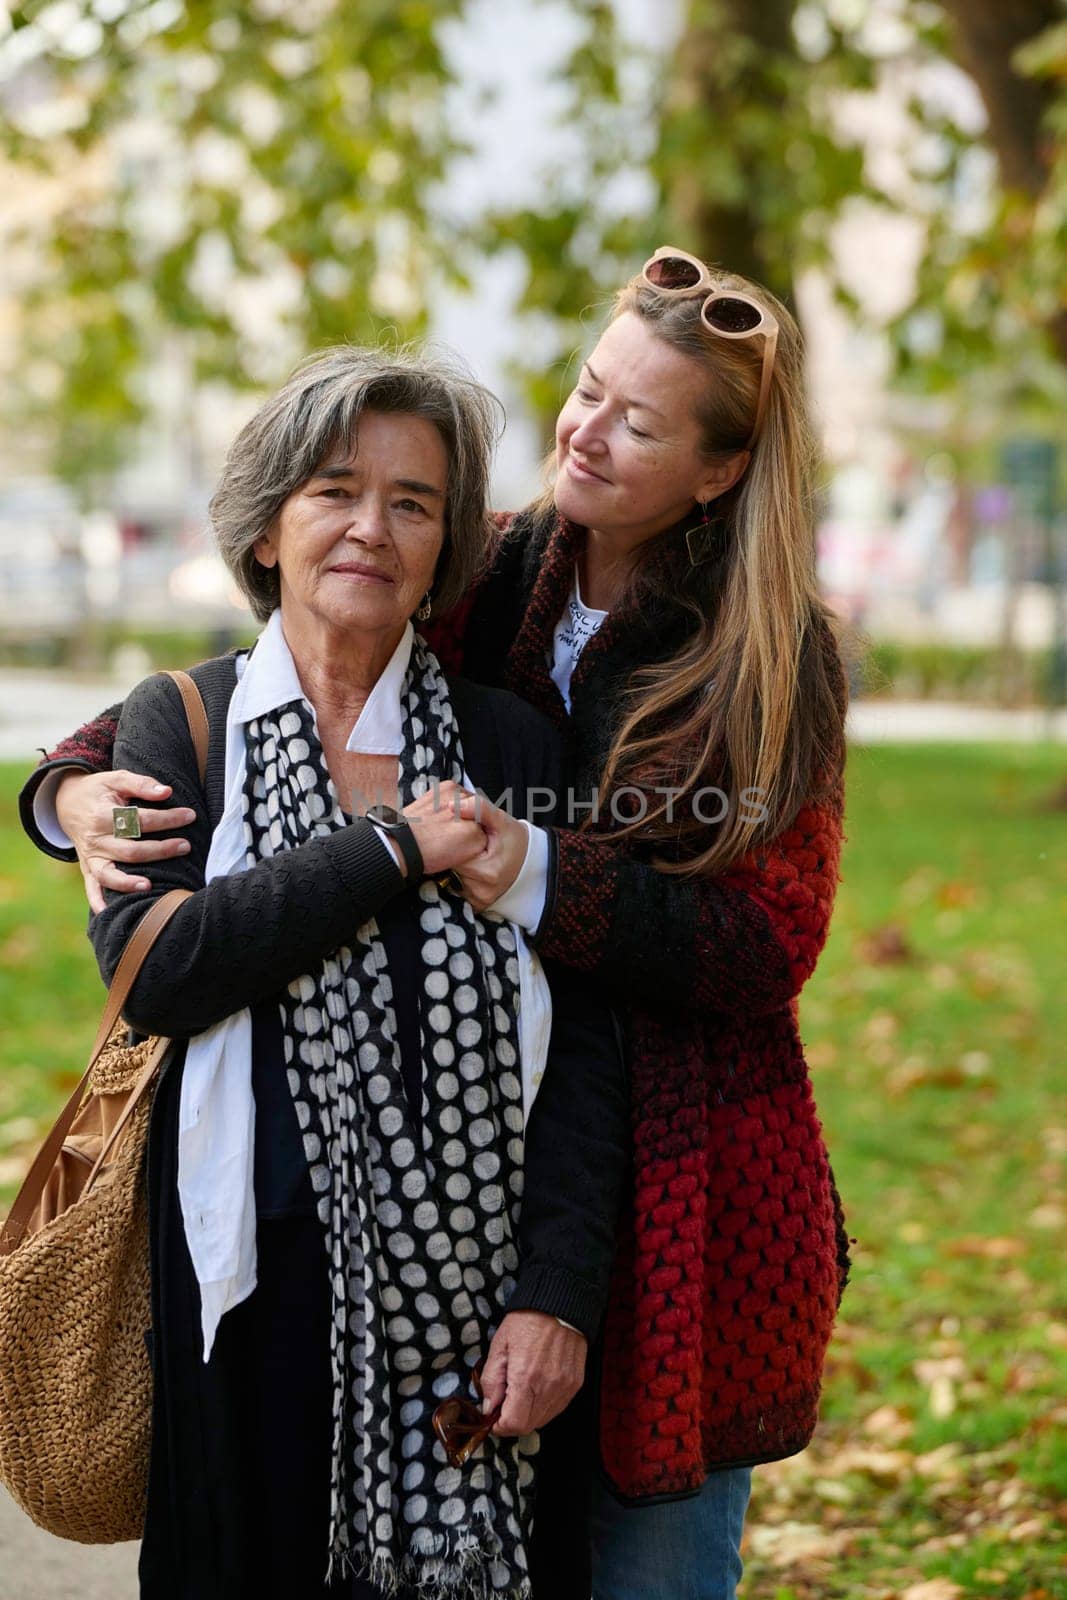 Elderly old cute woman with Alzheimer's very happy and smiling when eldest daughter hugs and takes care of her in park in autumn. Theme aging and parenting, family relationships and social care.